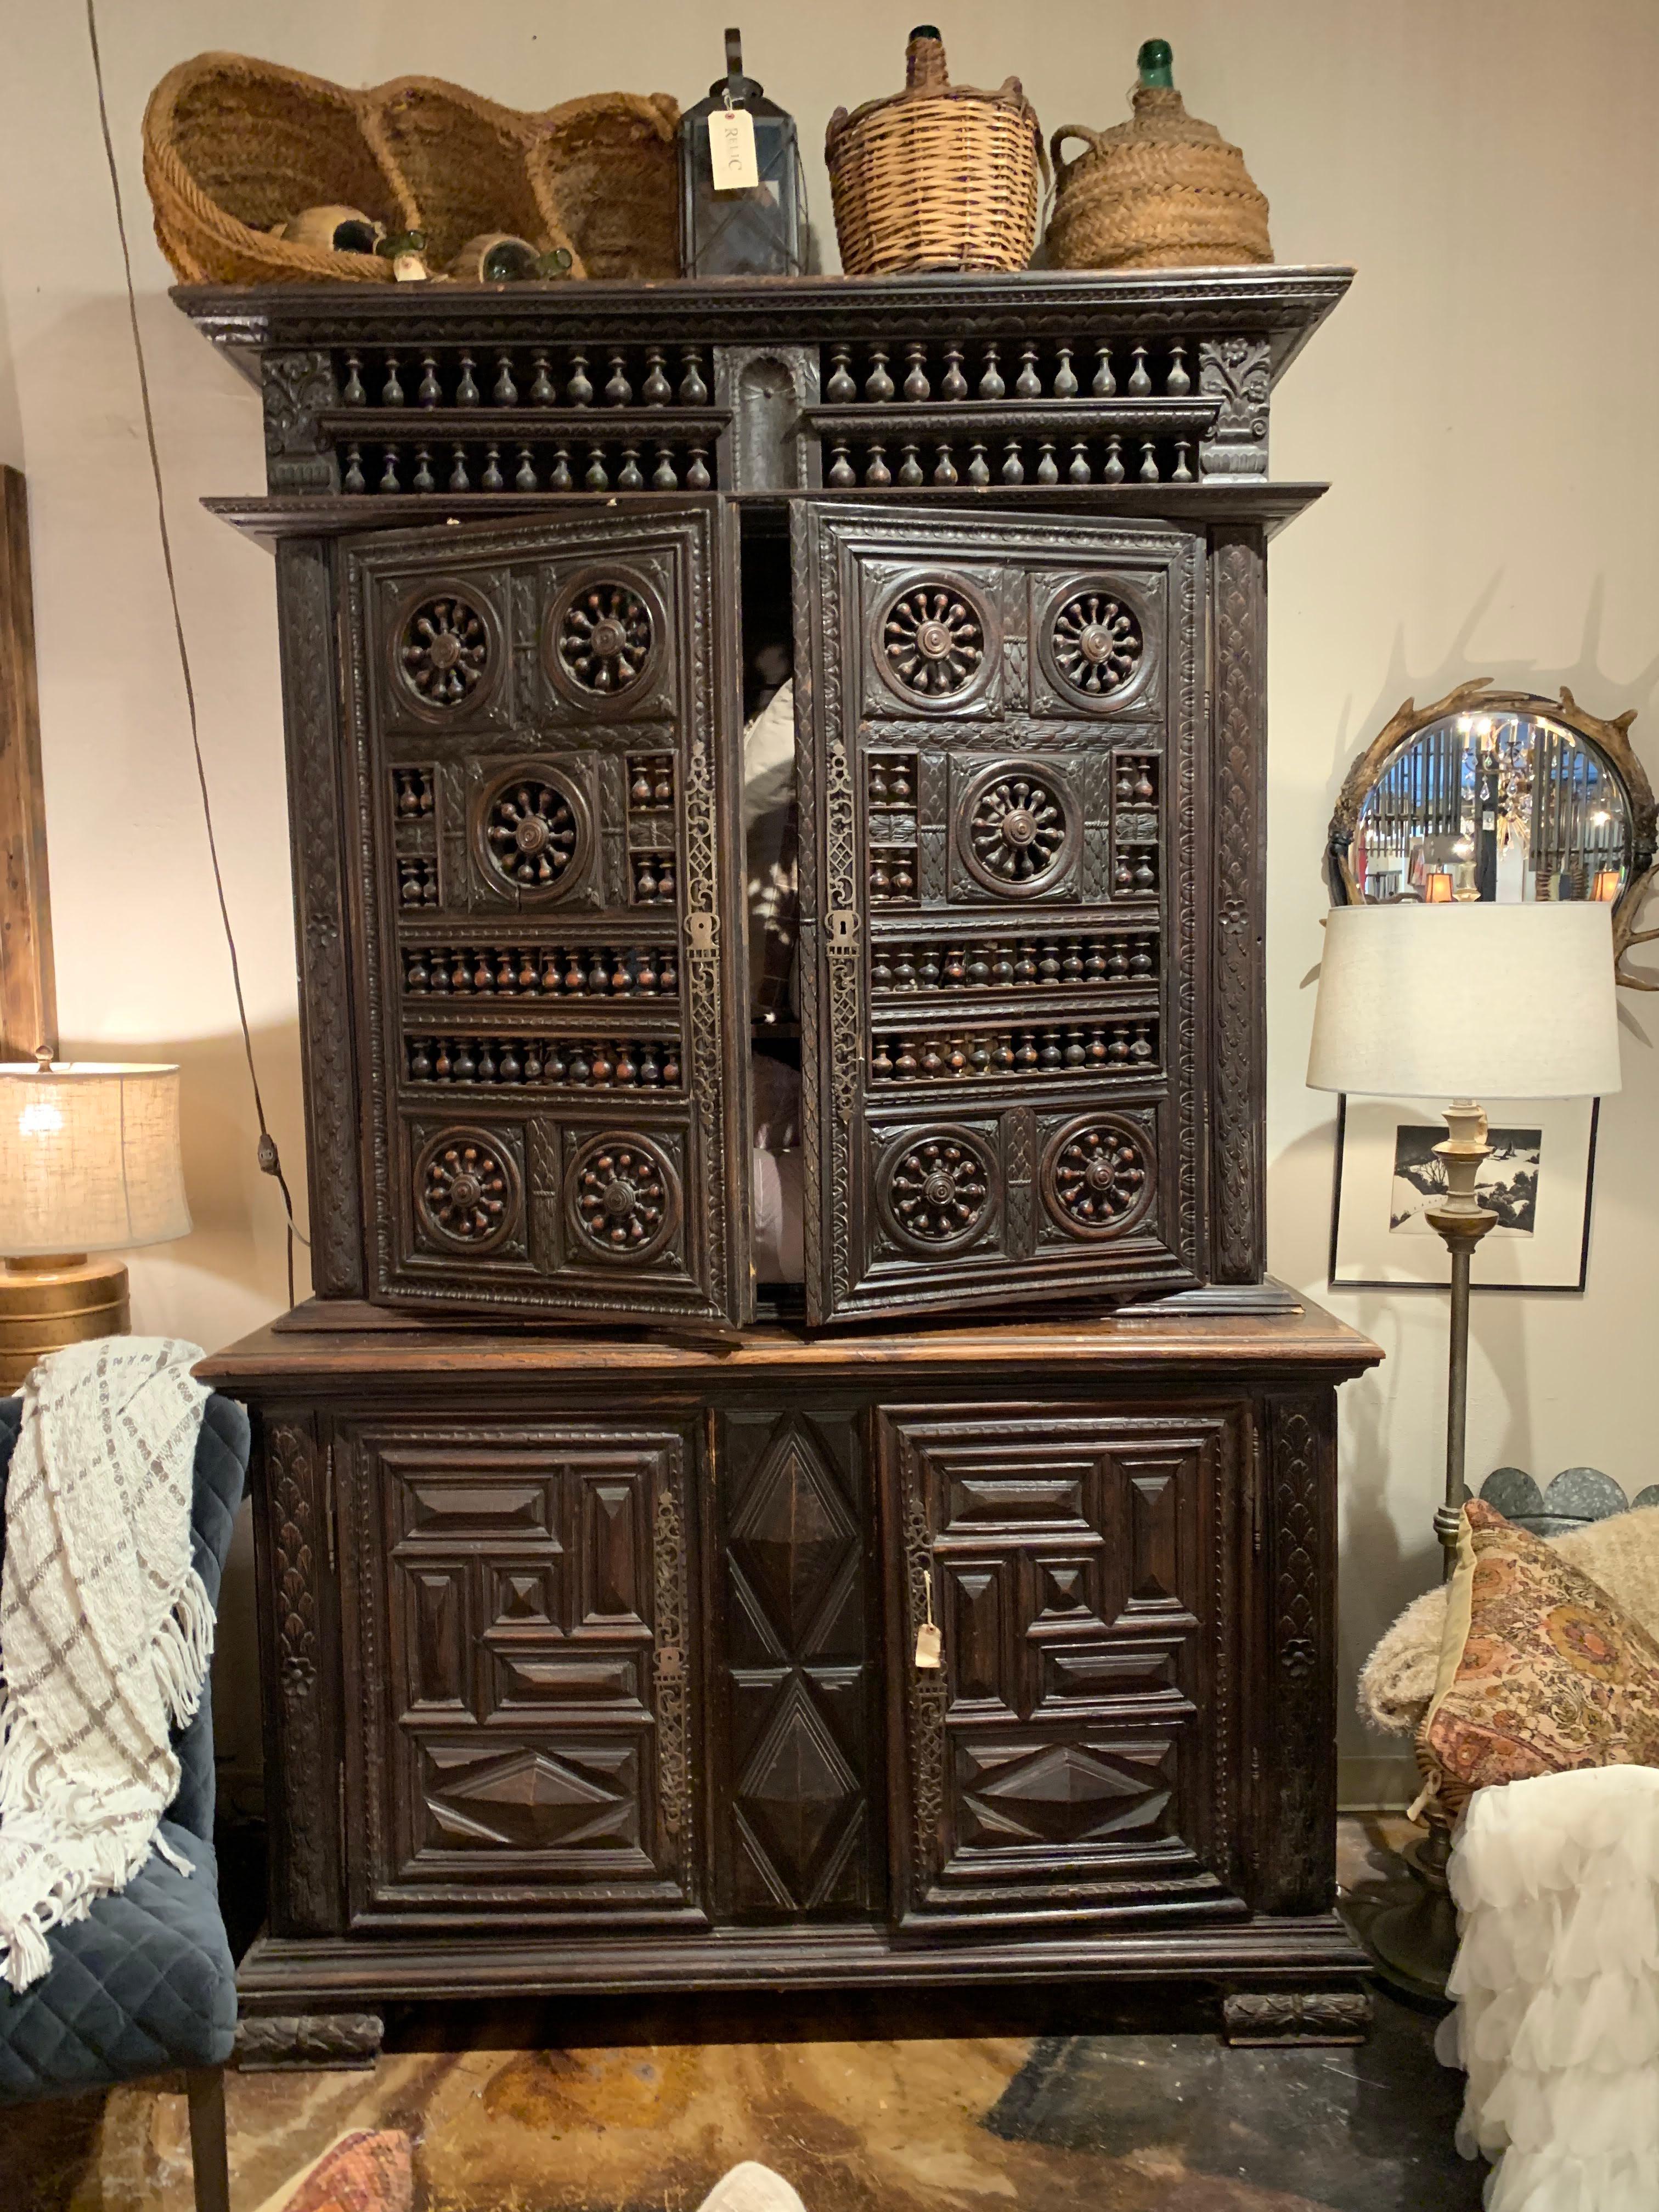 The extraordinary antique double buffet is from Brittany / Normandy region, France. It was made in the early 1800 (1820-1850). The heavy carving, turned wheel spokes and incredible detail show how much craftsmanship and detailed work went into